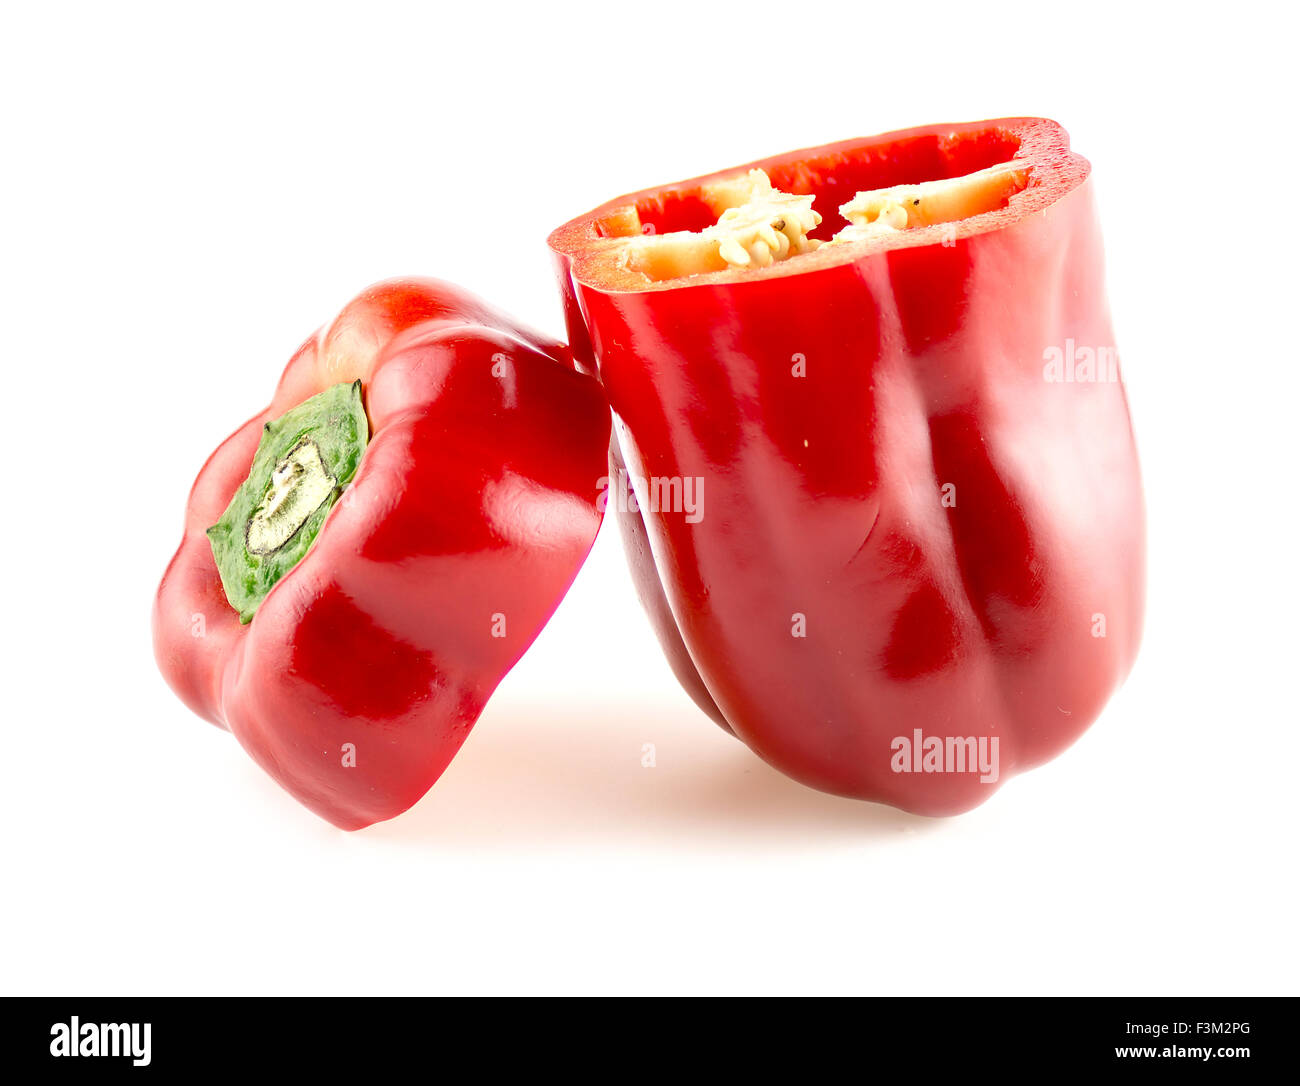 Organic, bright red bell pepper Stock Photo